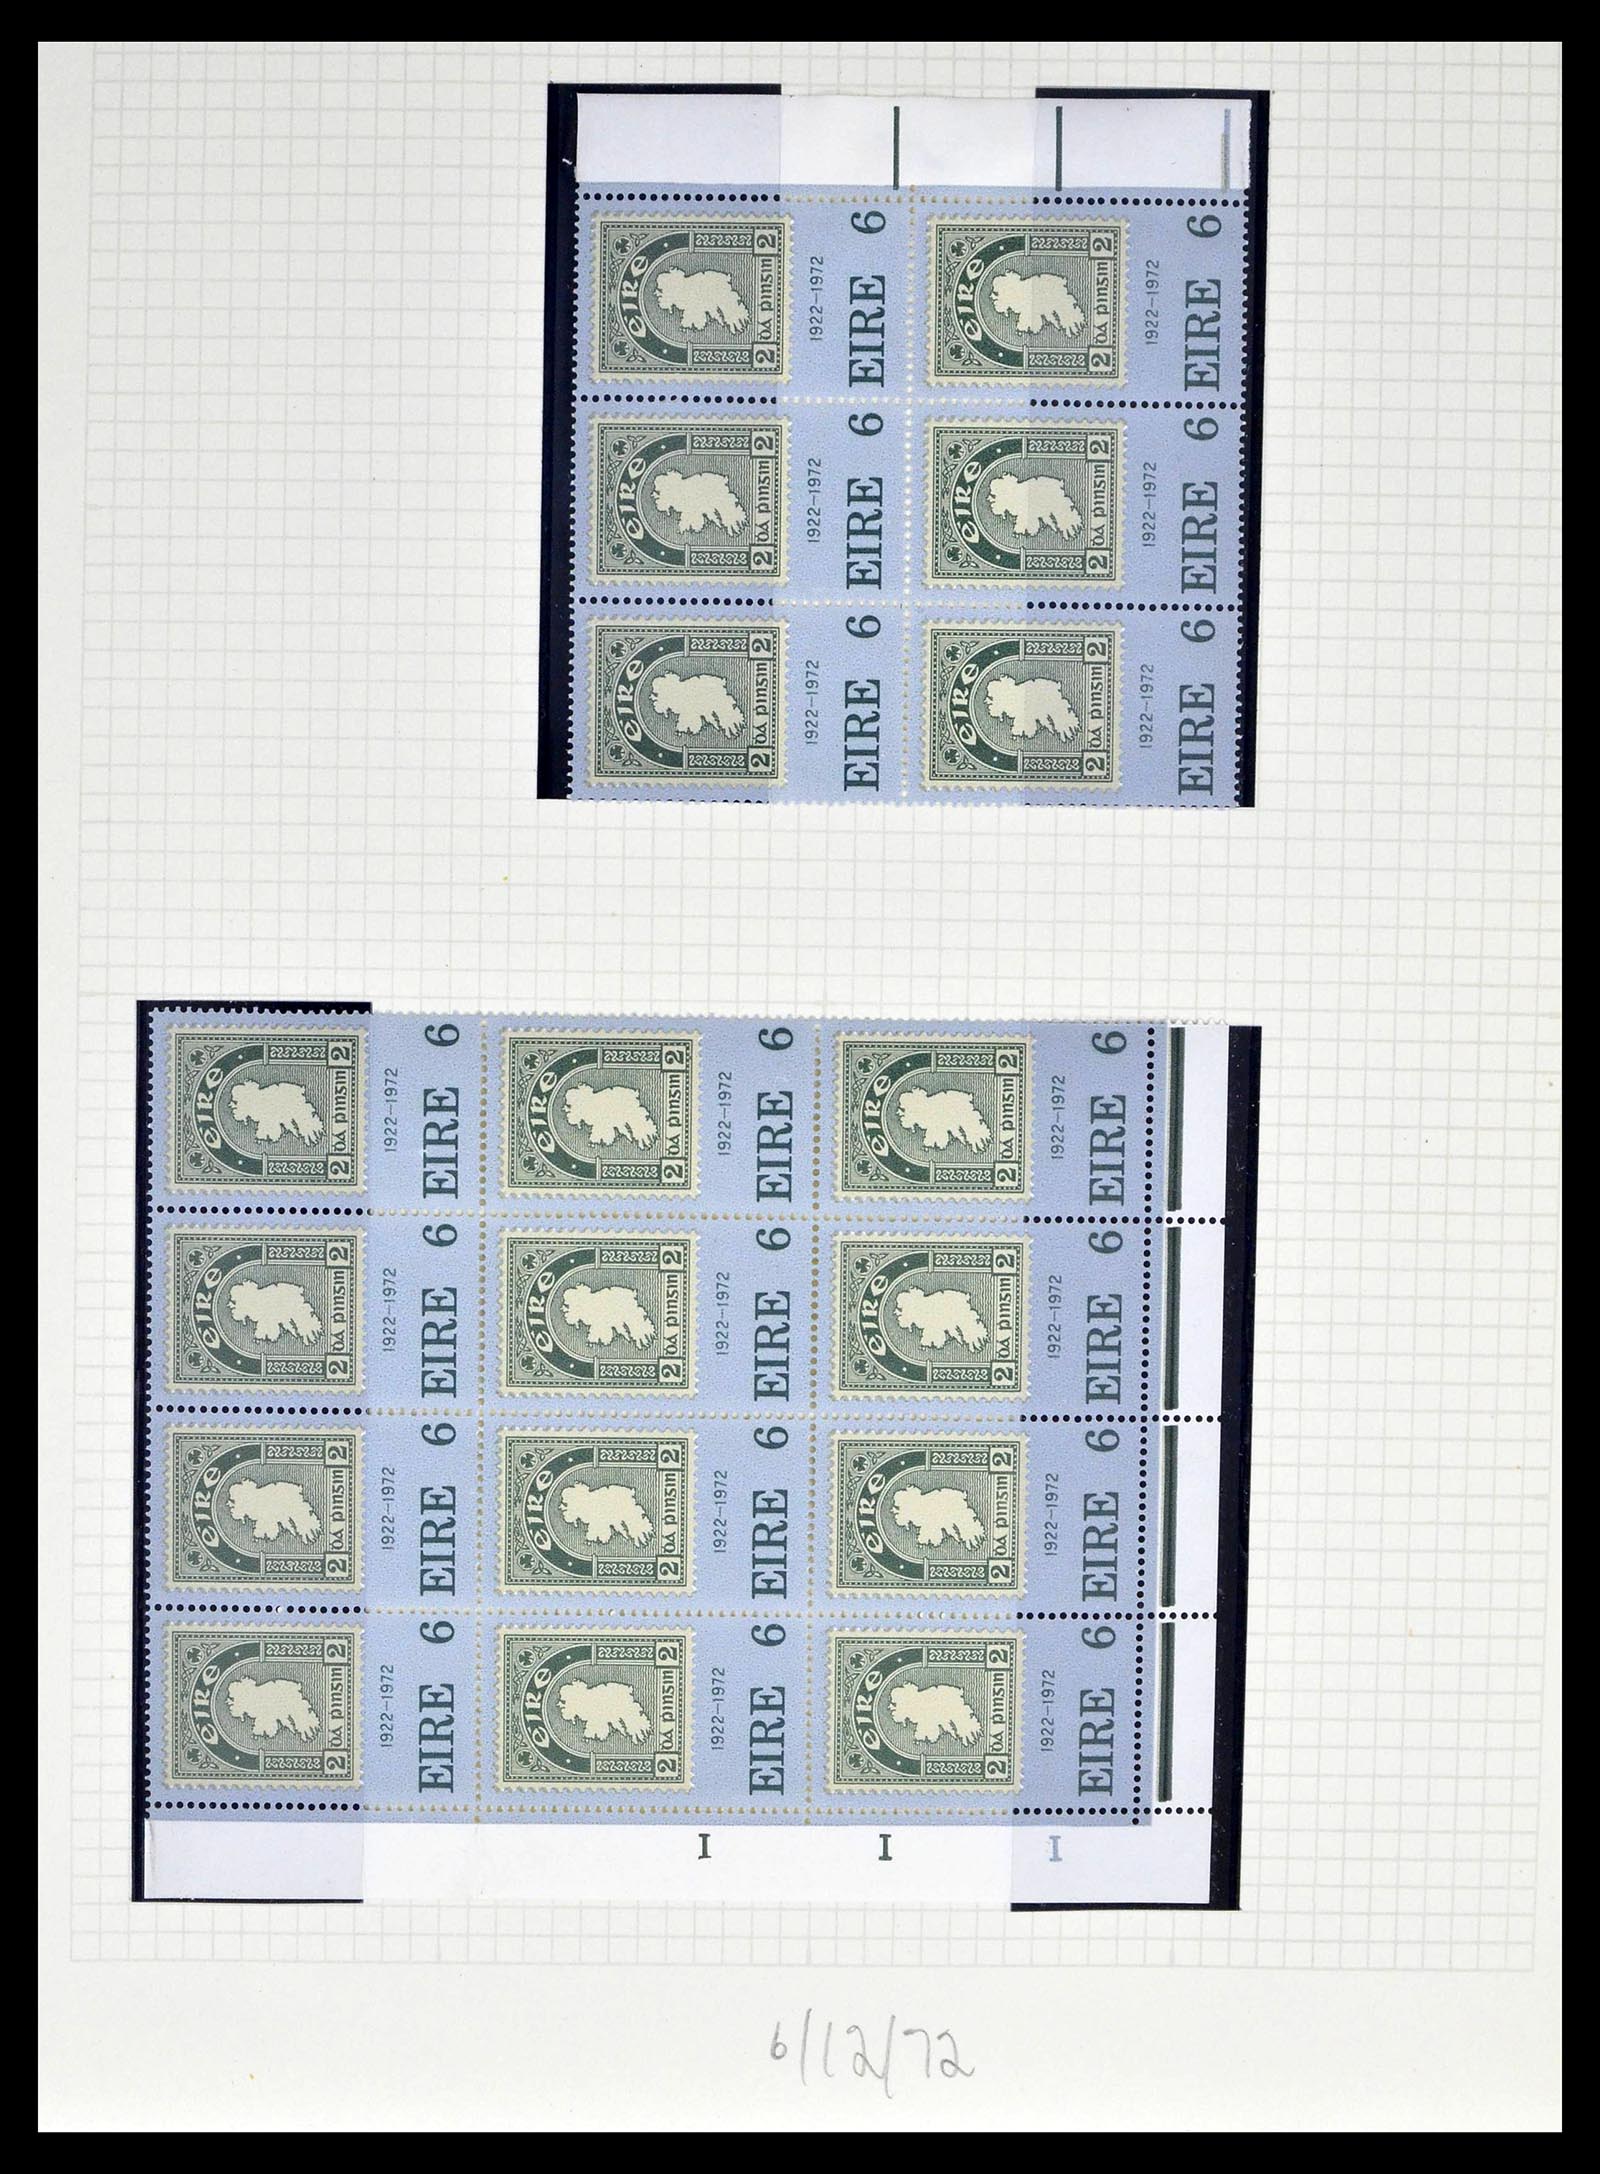 39272 0025 - Stamp collection 39272 Ireland plateflaws and varities 1963-1981.